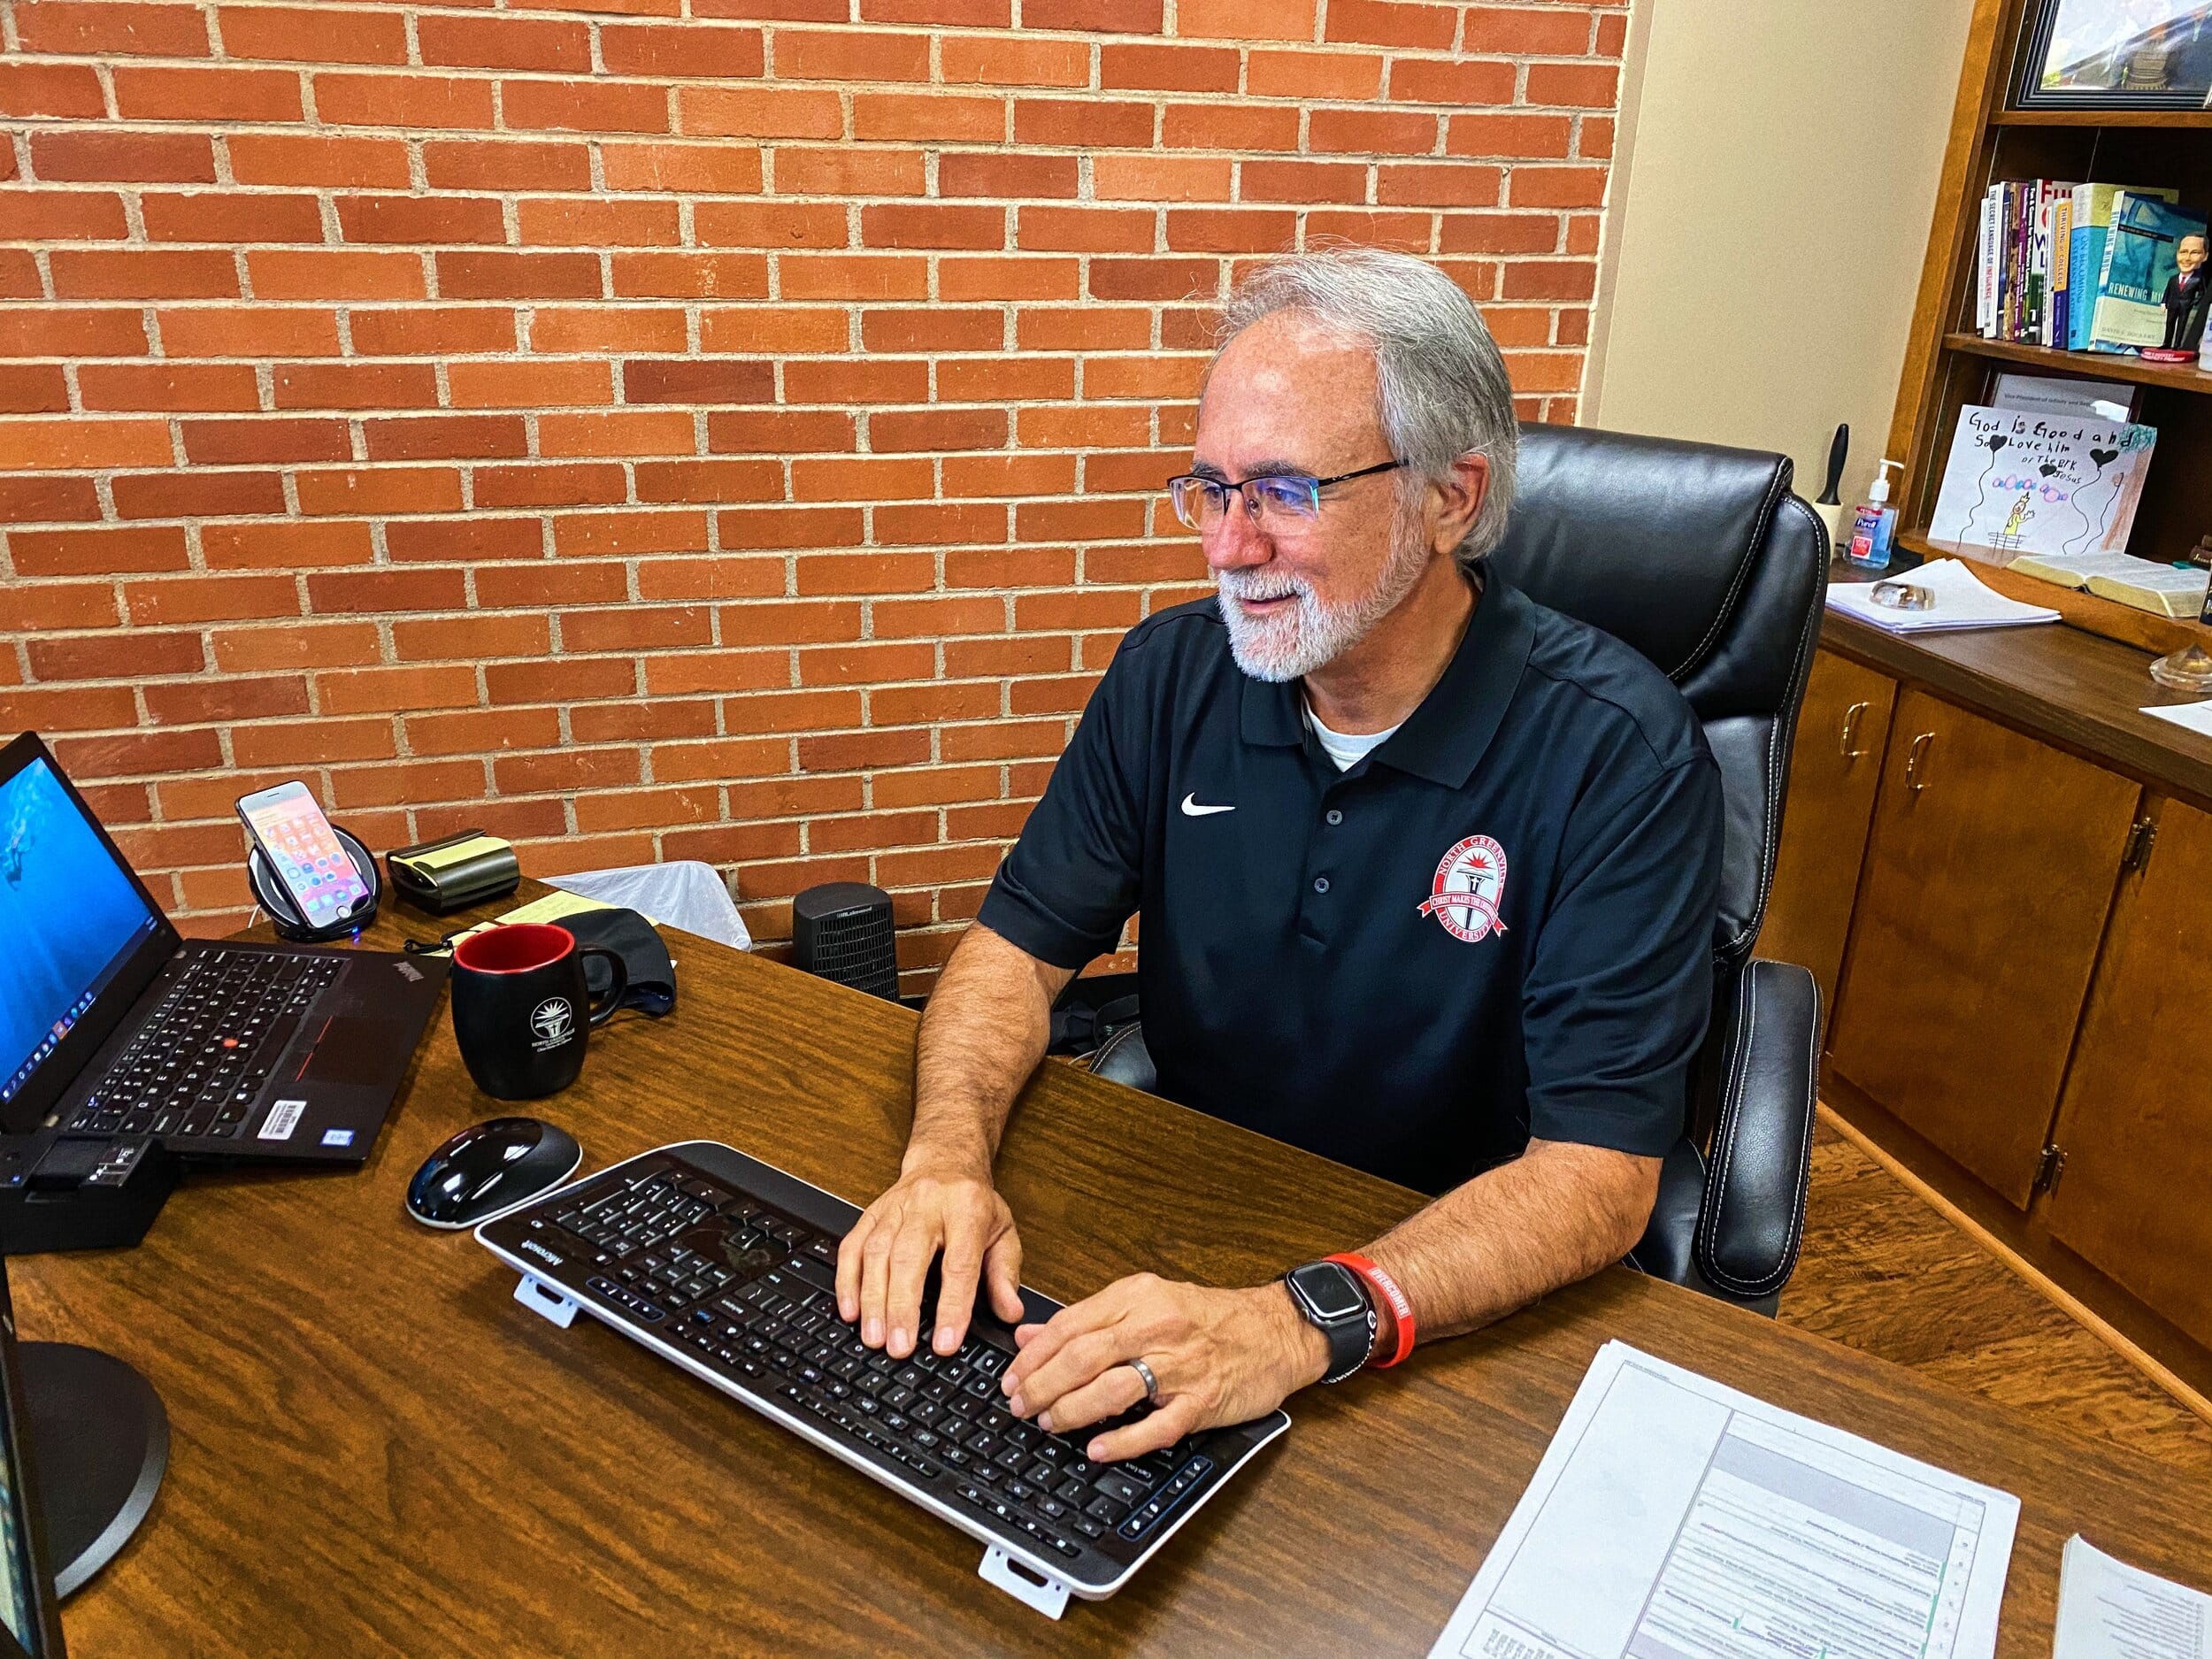 NGU Executive Vice President Rich Grimm was named chair of the COVID-19 response team back in February and has been instrumental in keeping cases on campus to a minimum.